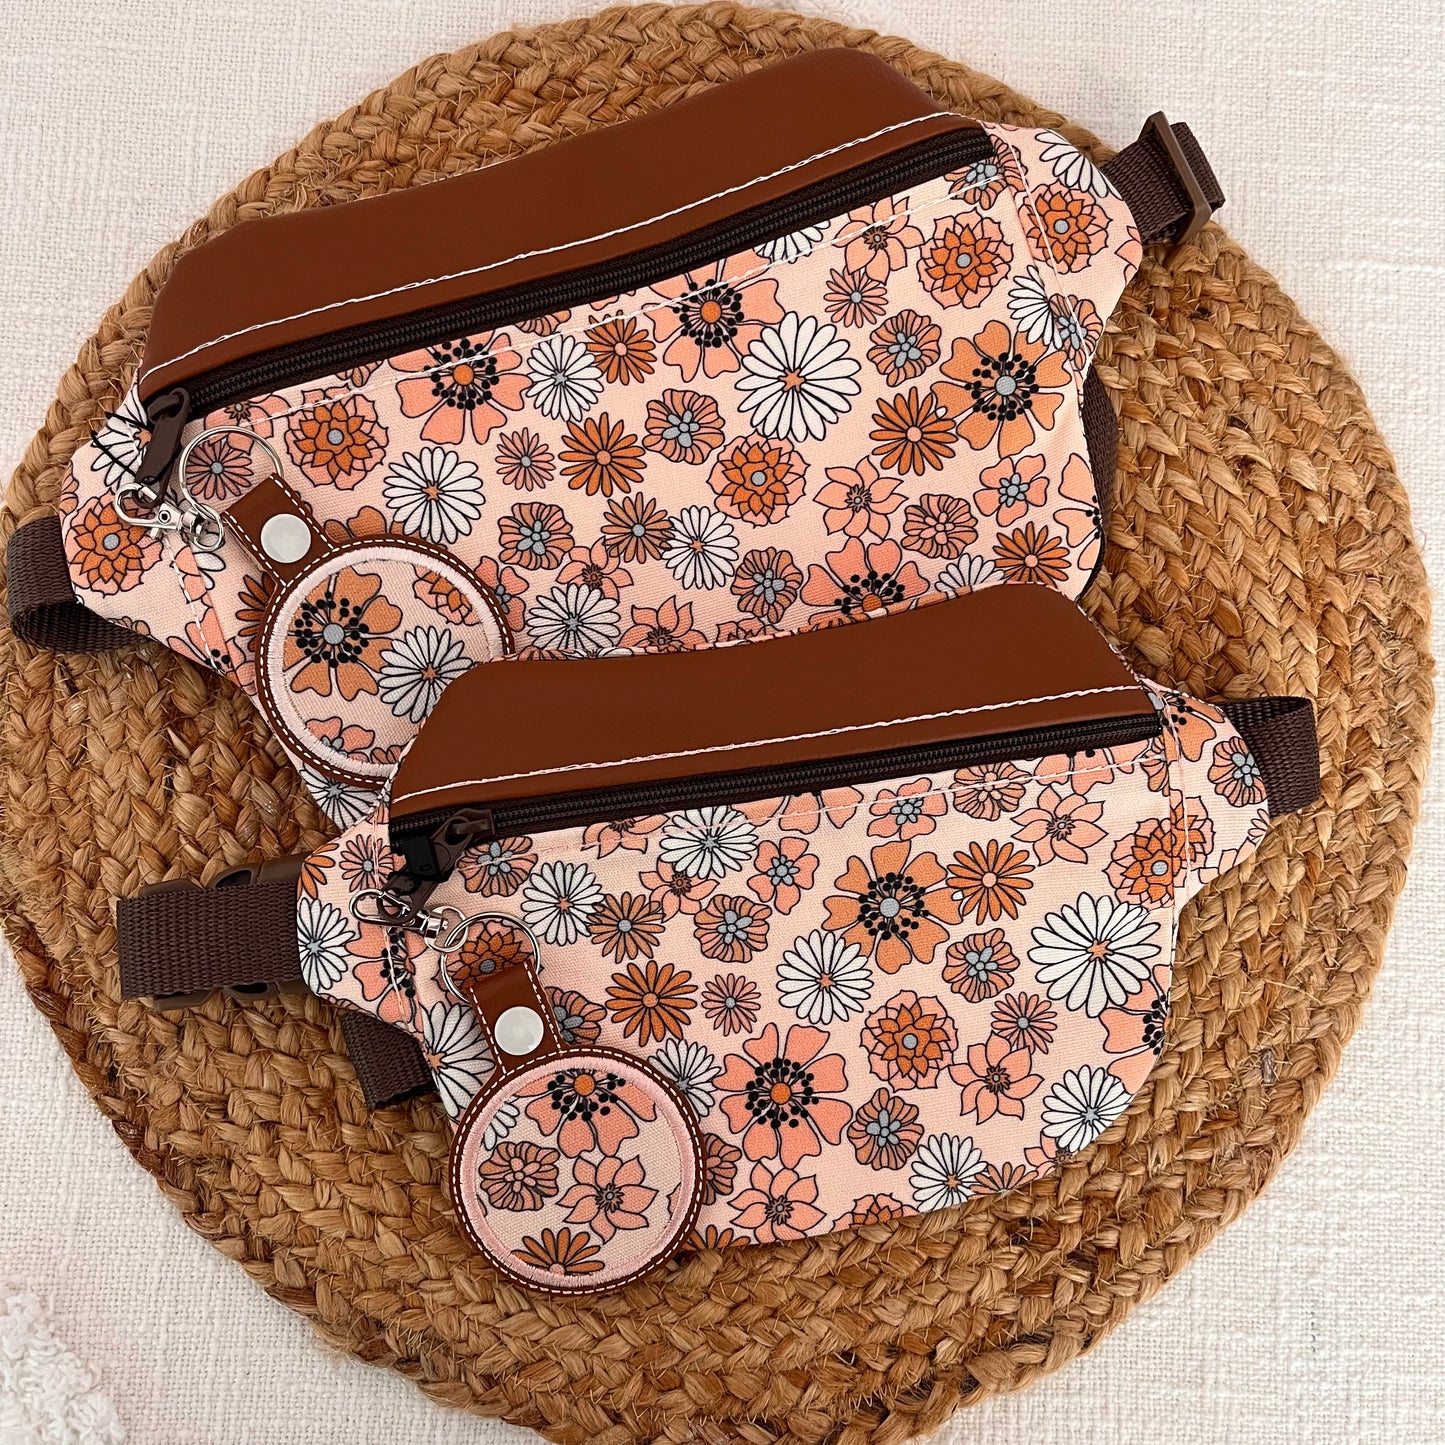 Retro Floral Fanny Pack